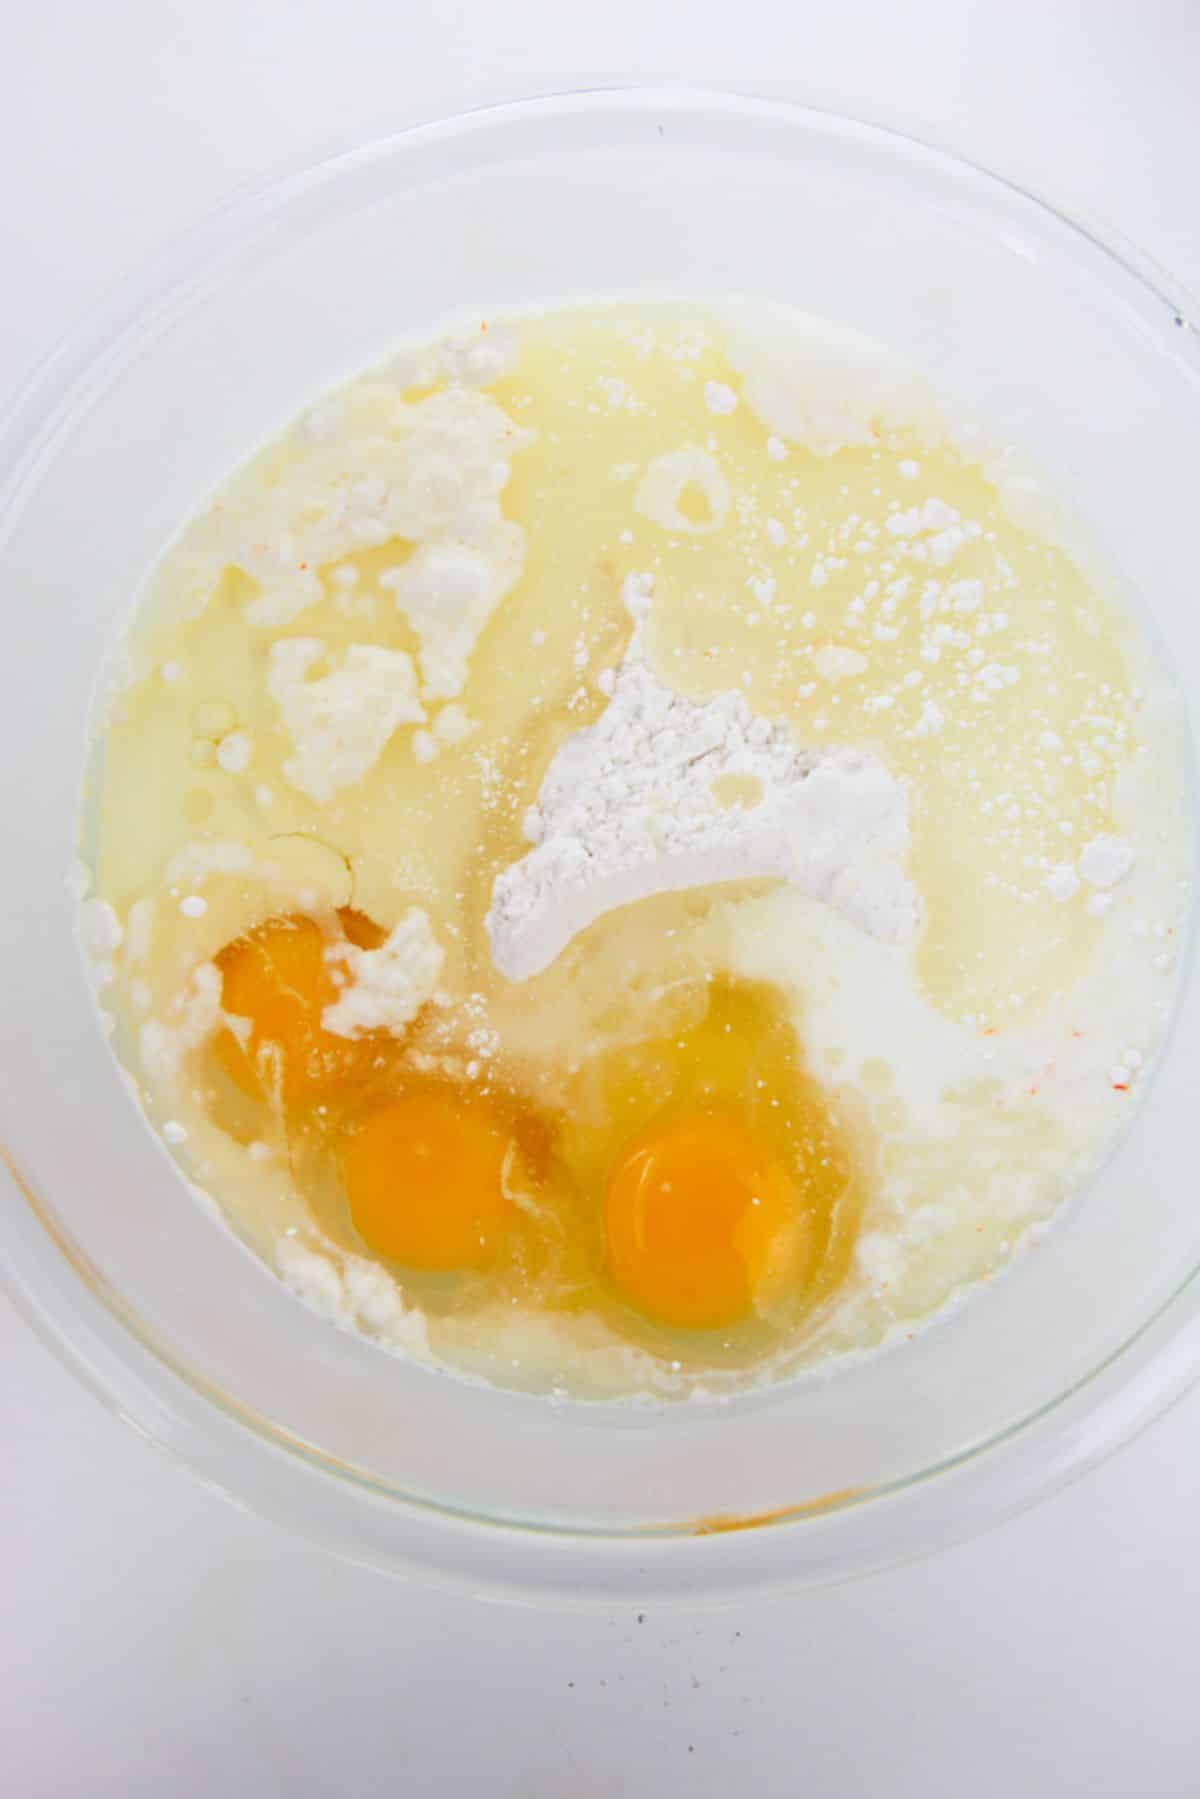 Cake mix, eggs and oil in a mixing bowl.